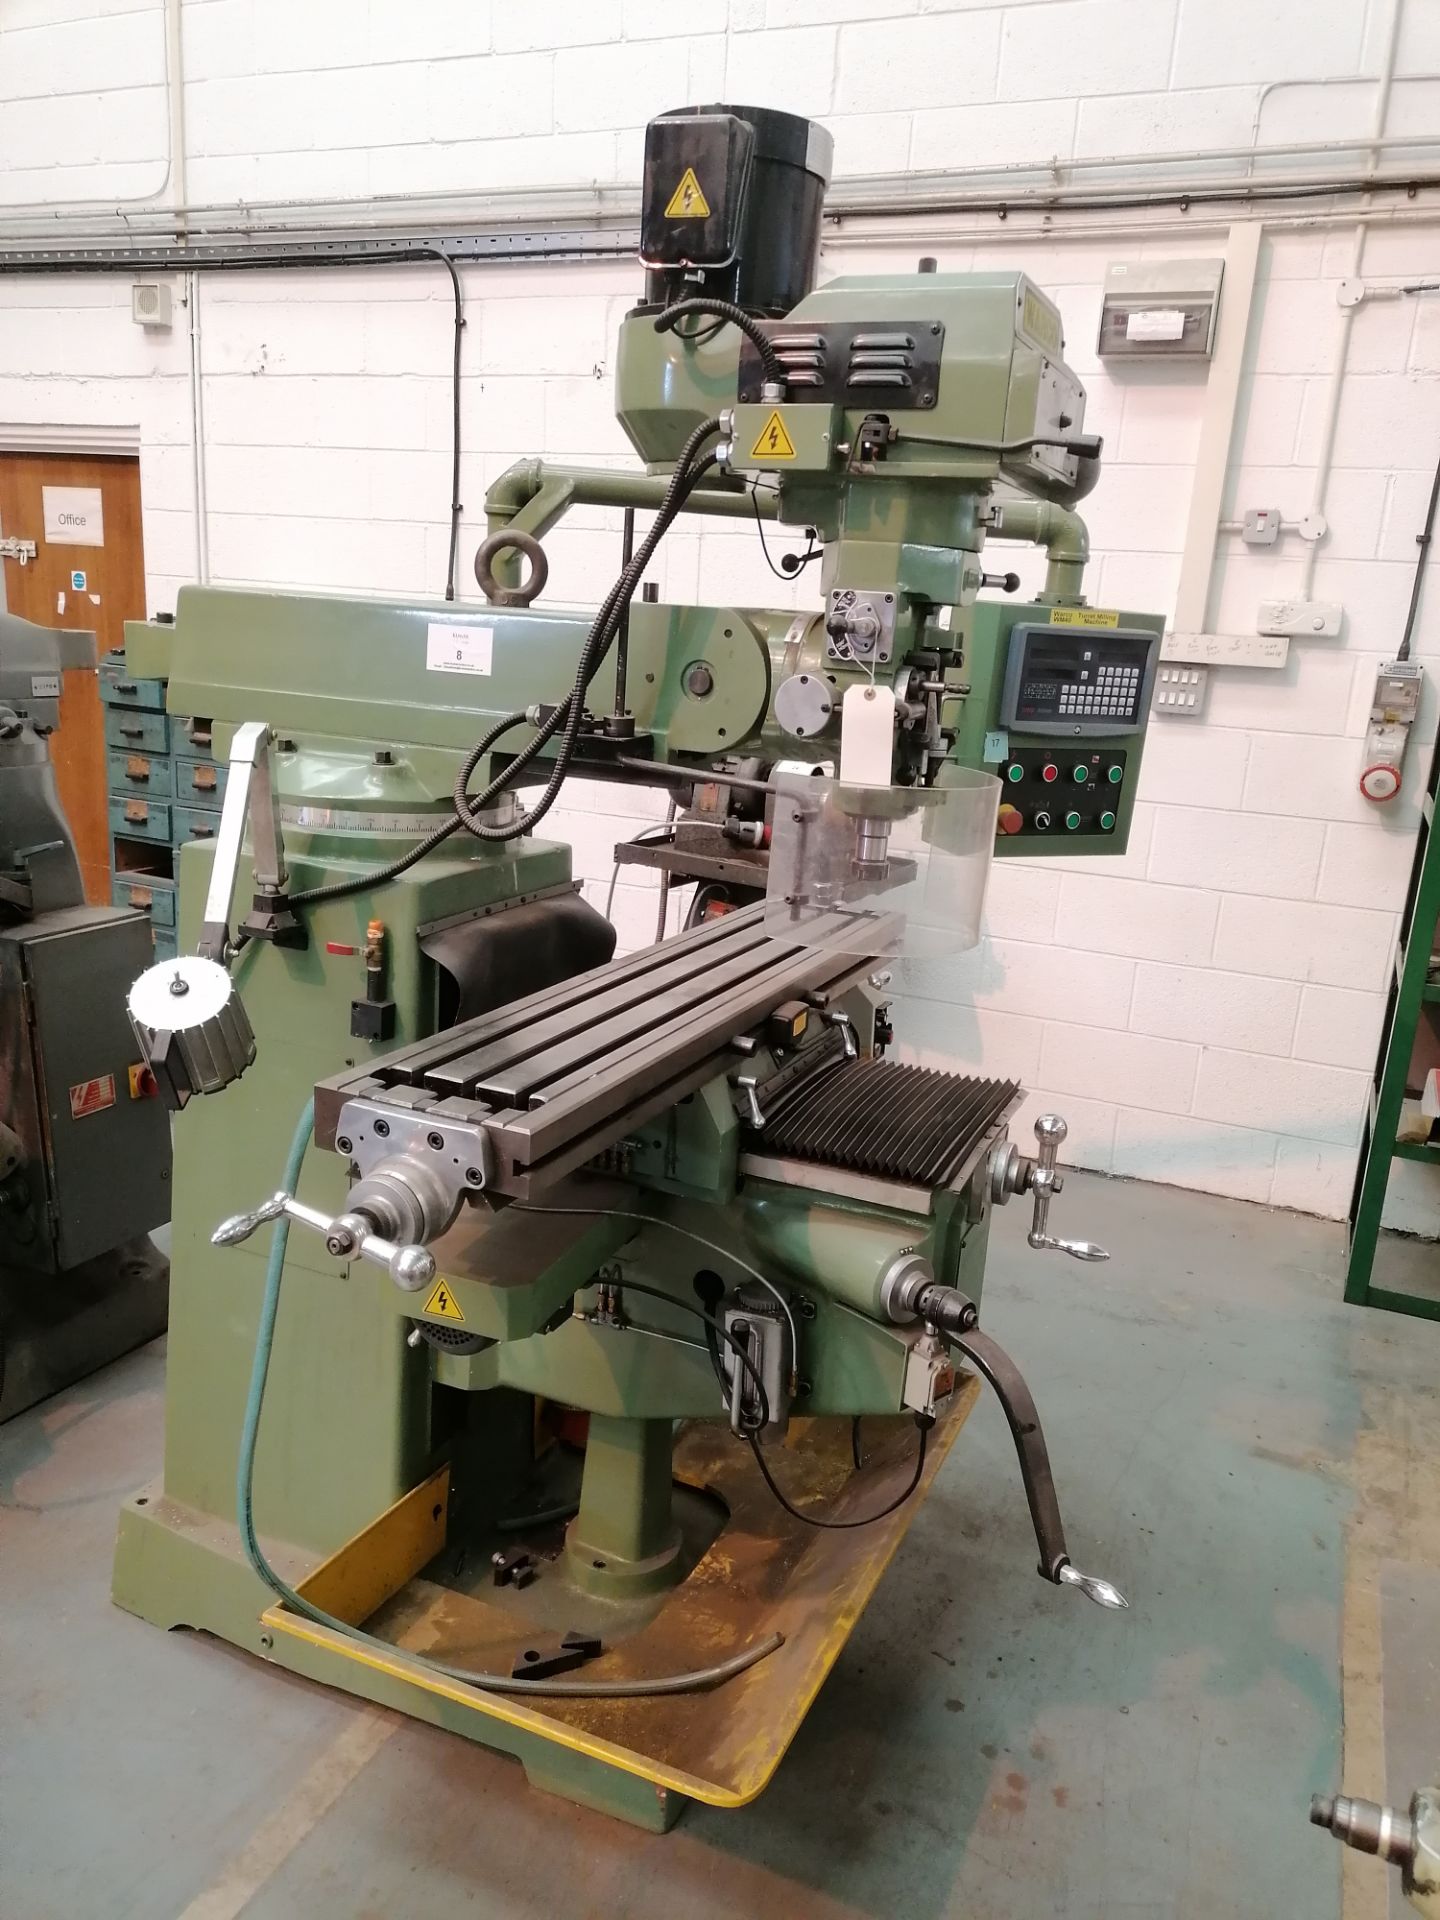 Warco WM40 Turret milling machine serial No 1602066 fitted with 2 axis Sino SDS2MS digital read